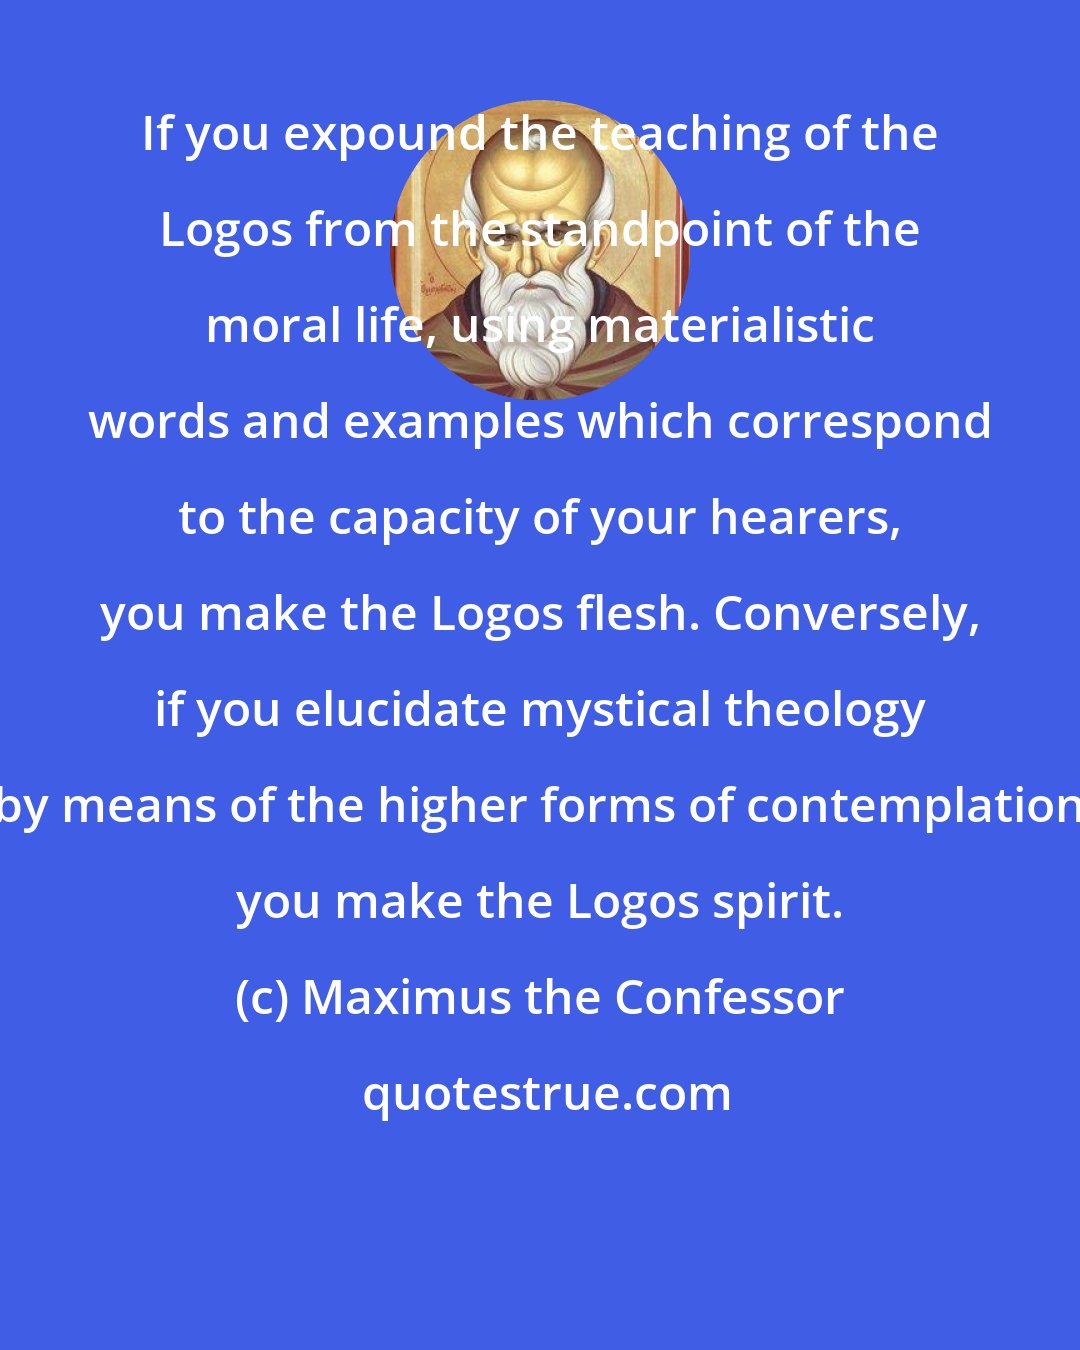 Maximus the Confessor: If you expound the teaching of the Logos from the standpoint of the moral life, using materialistic words and examples which correspond to the capacity of your hearers, you make the Logos flesh. Conversely, if you elucidate mystical theology by means of the higher forms of contemplation you make the Logos spirit.